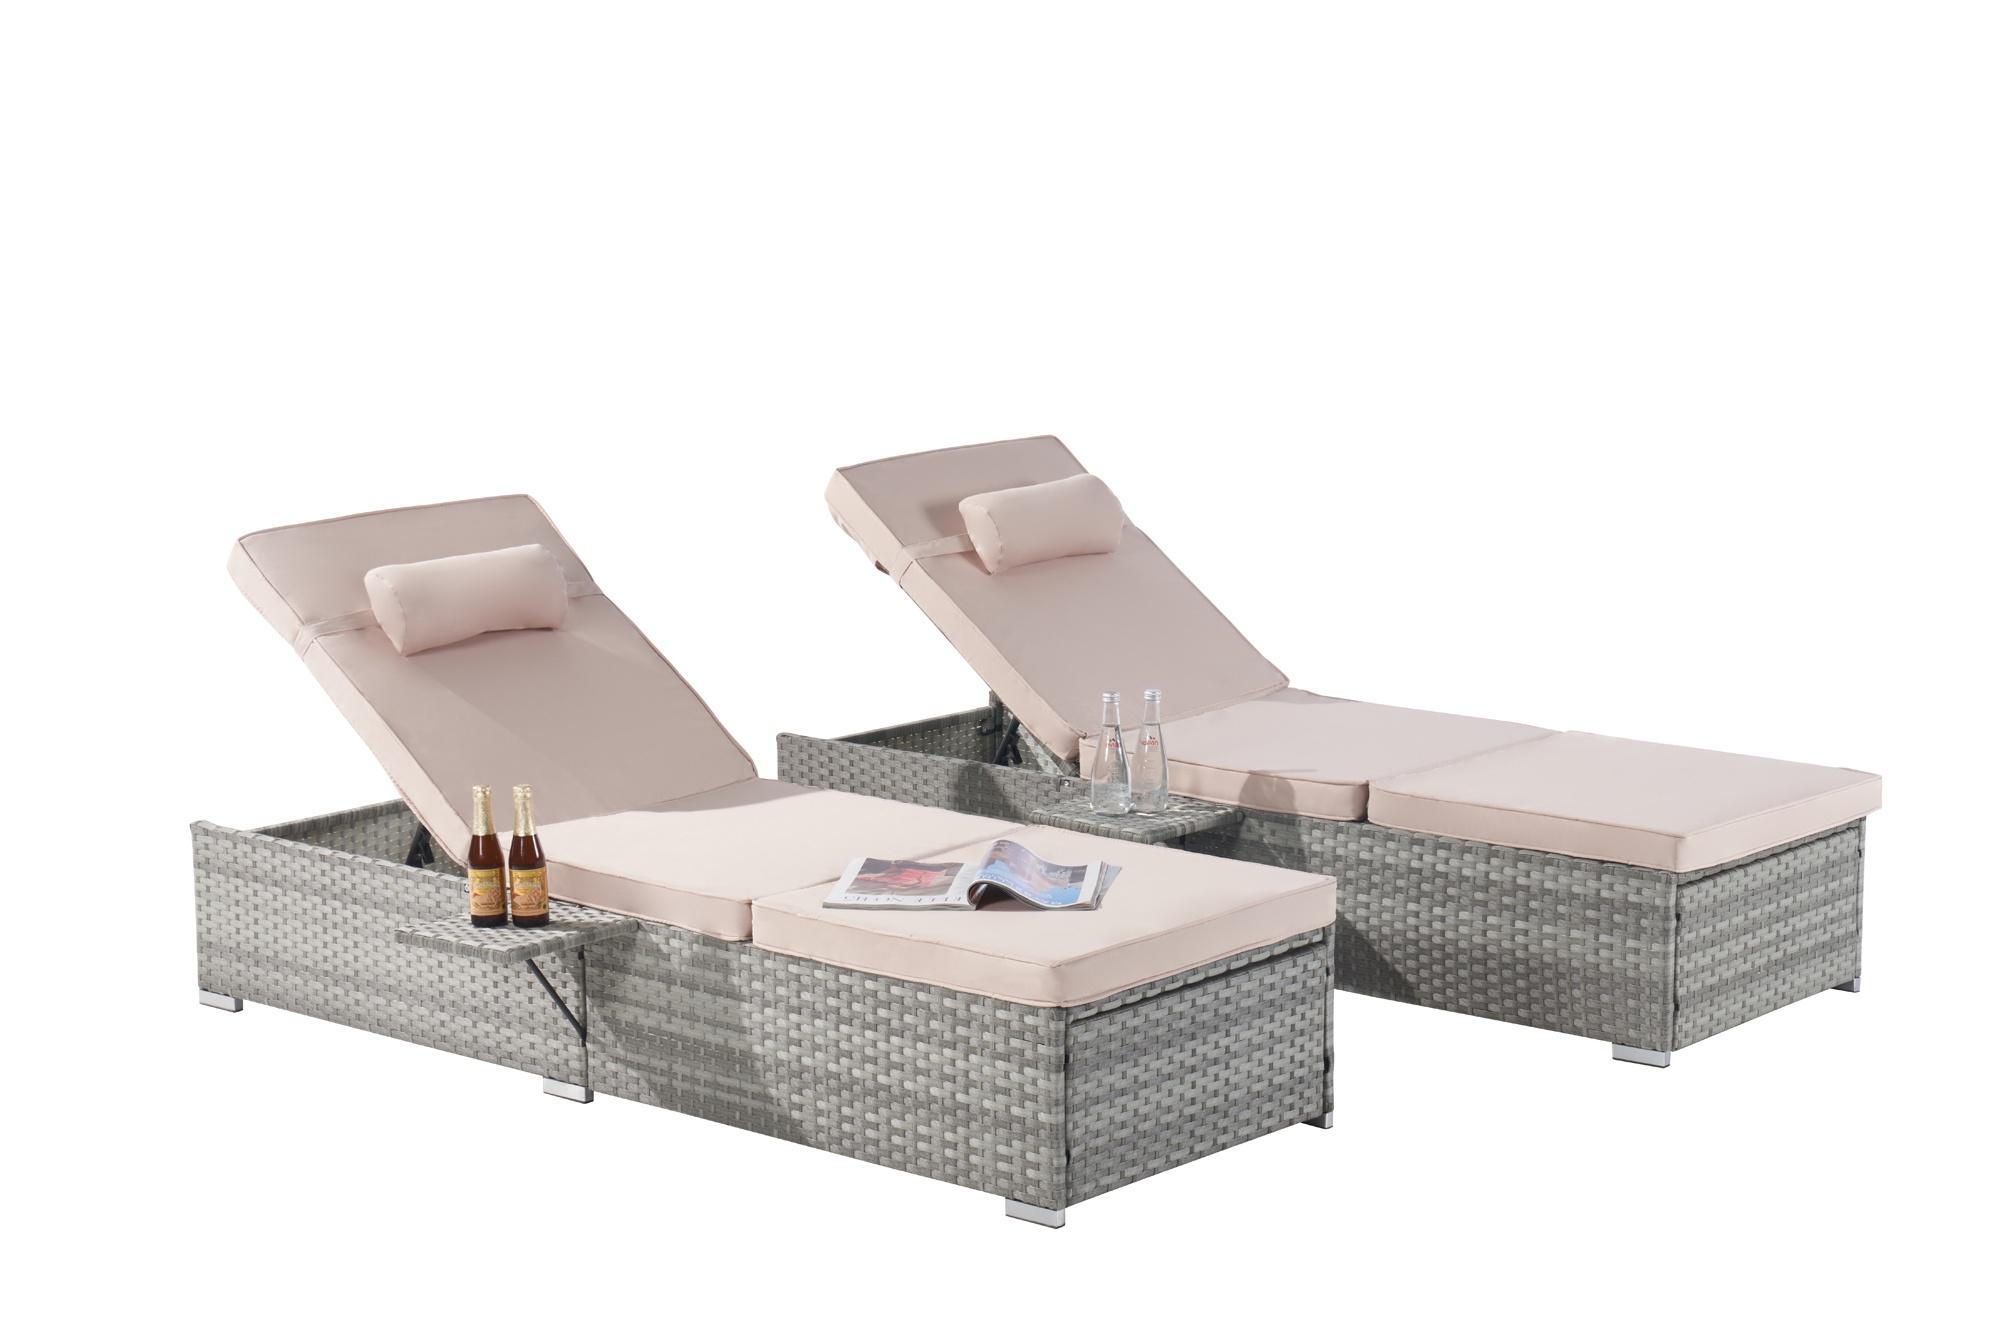 Patio Chaise Lounge Set of 2, Outdoor Lounge Chairs with 5 Backrest Angles, Chaise Lounge Chairs, Patio Reclining Chair Furniture for Poolside, Deck, Backyard - image 3 of 10